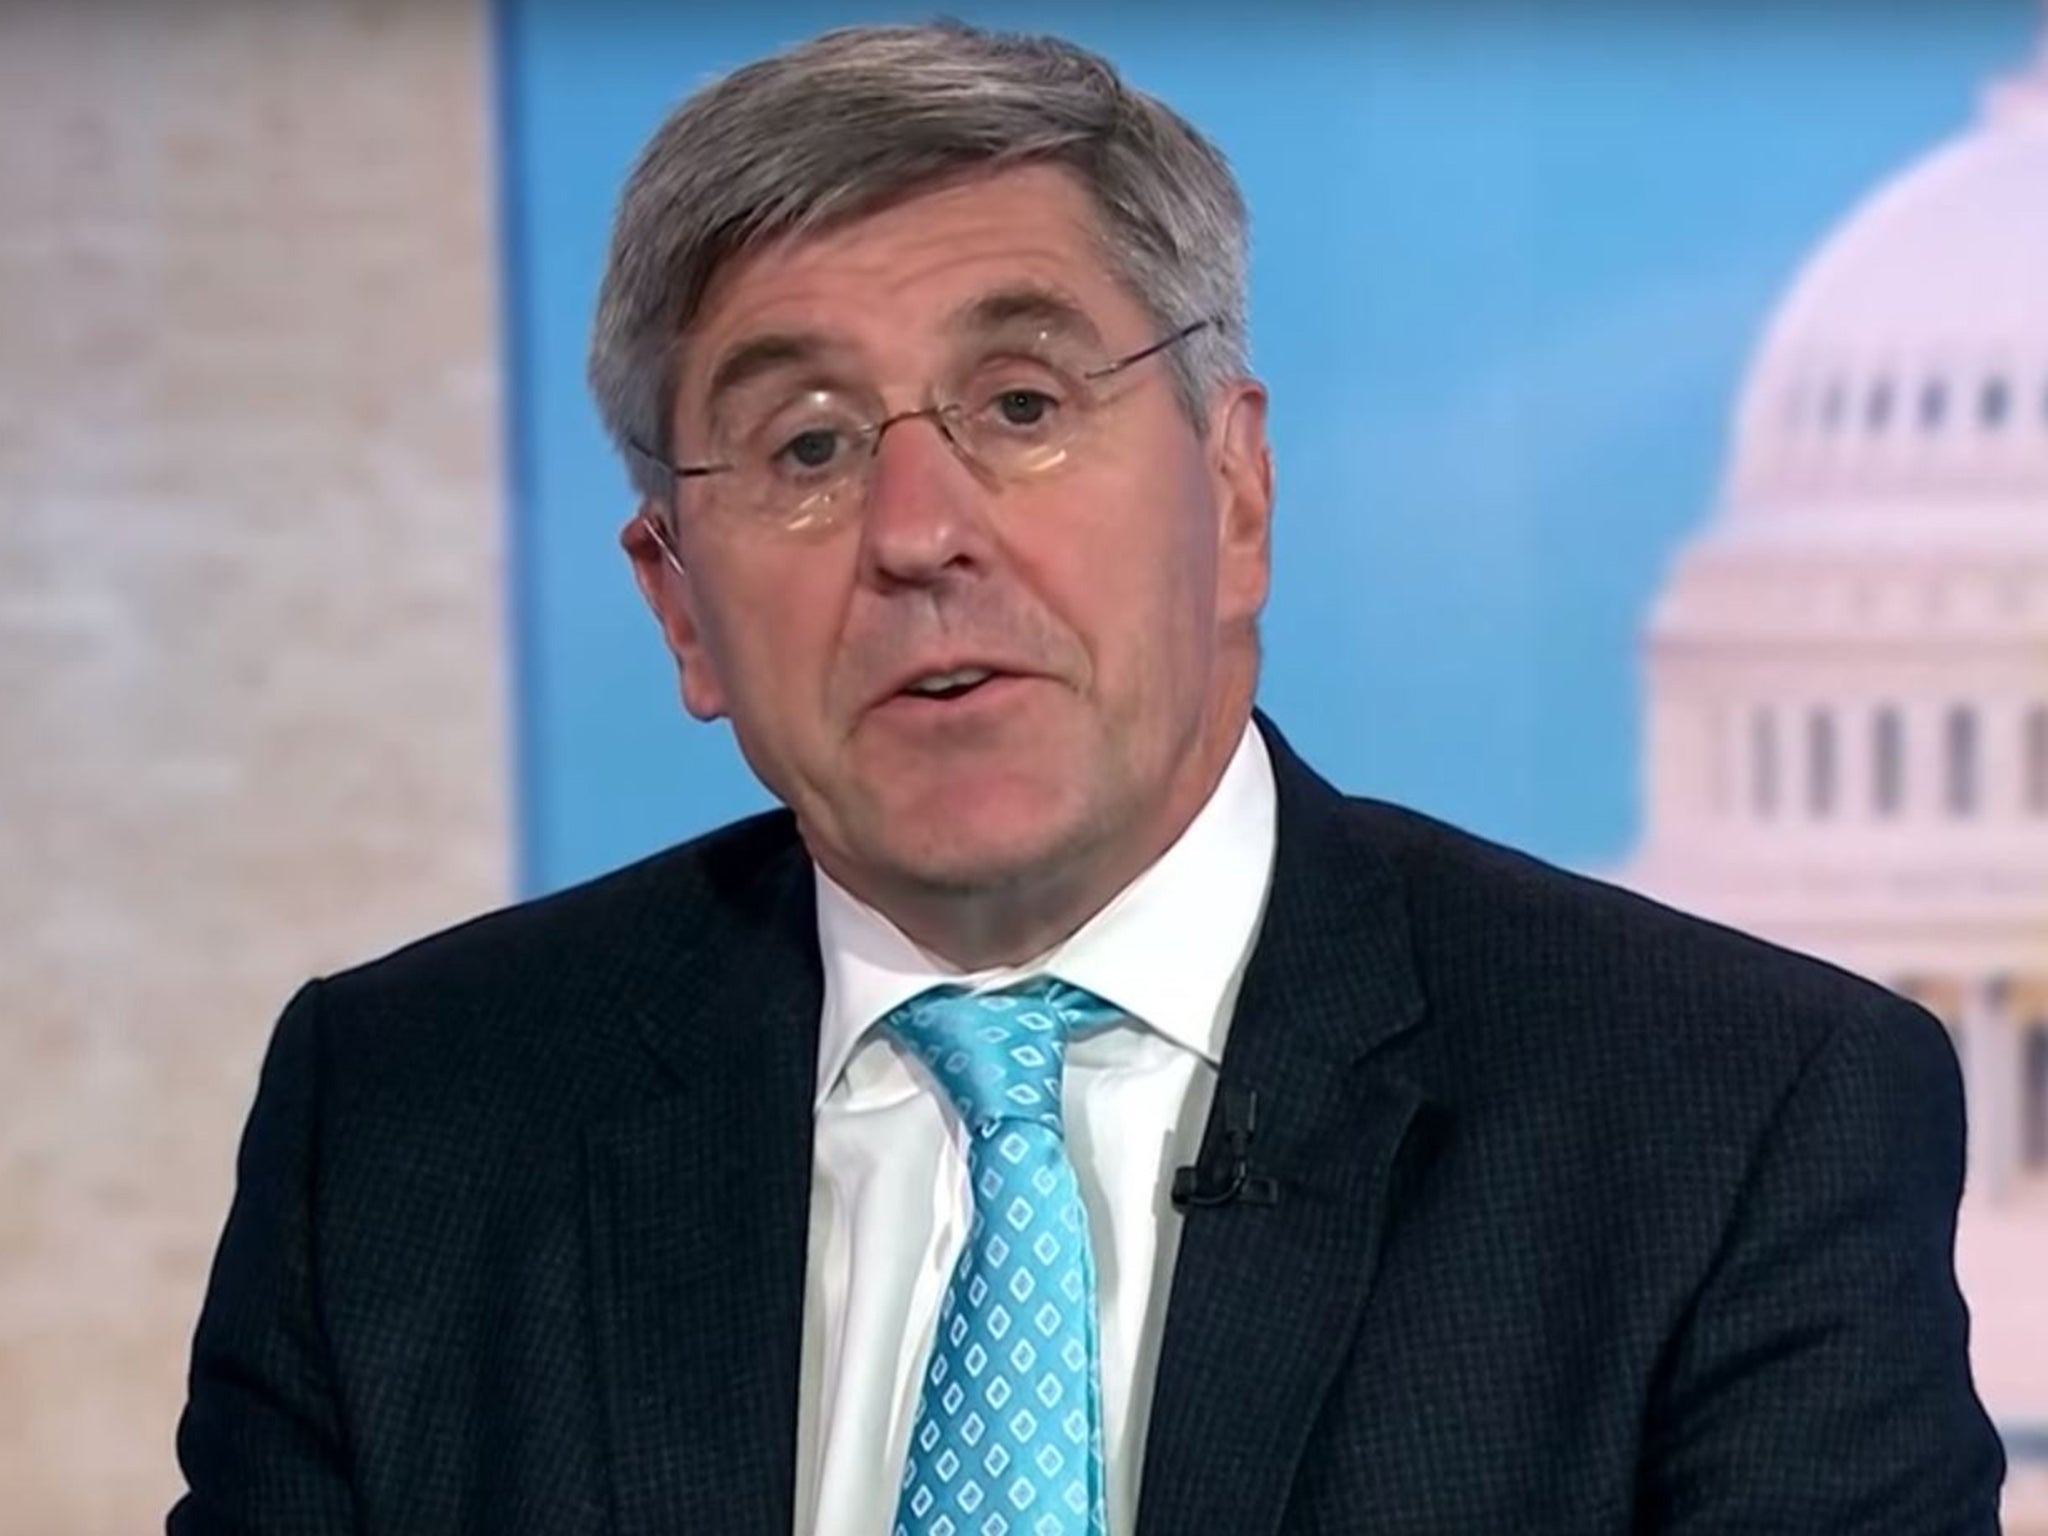 Stephen Moore owes $75,000 in unpaid federal taxes, interest and penalties, according to court documents filed last year